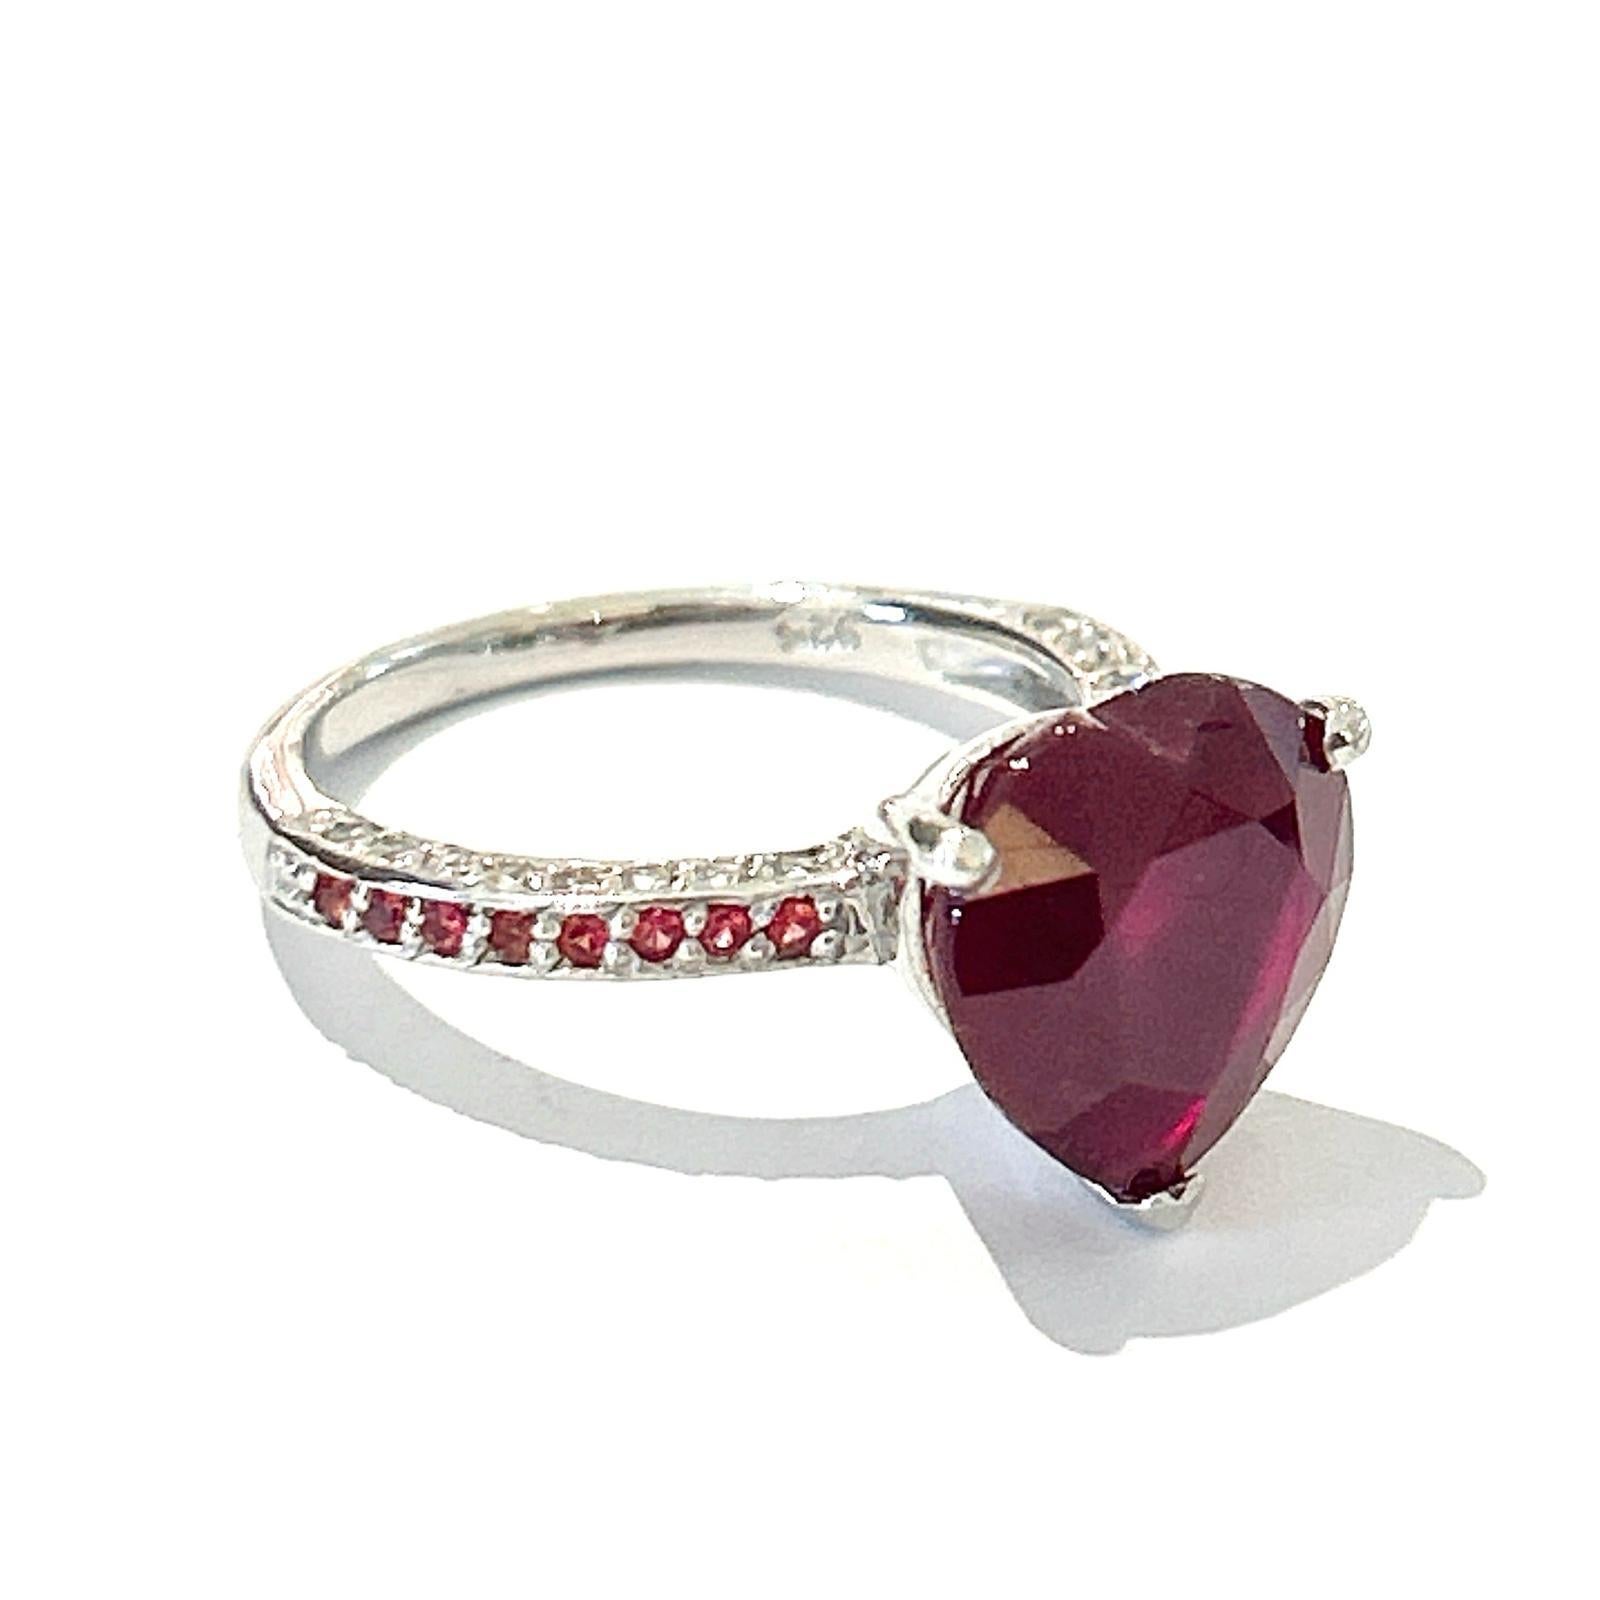 Bochic “Orient” Diamond & Ruby Vintage Solitaire Ring Set In 18K & Silver 

Natural heart shape ruby - 3 carats 
Natural Single cut gray diamonds and rubies  - 1 carat 

This Ring is from the 